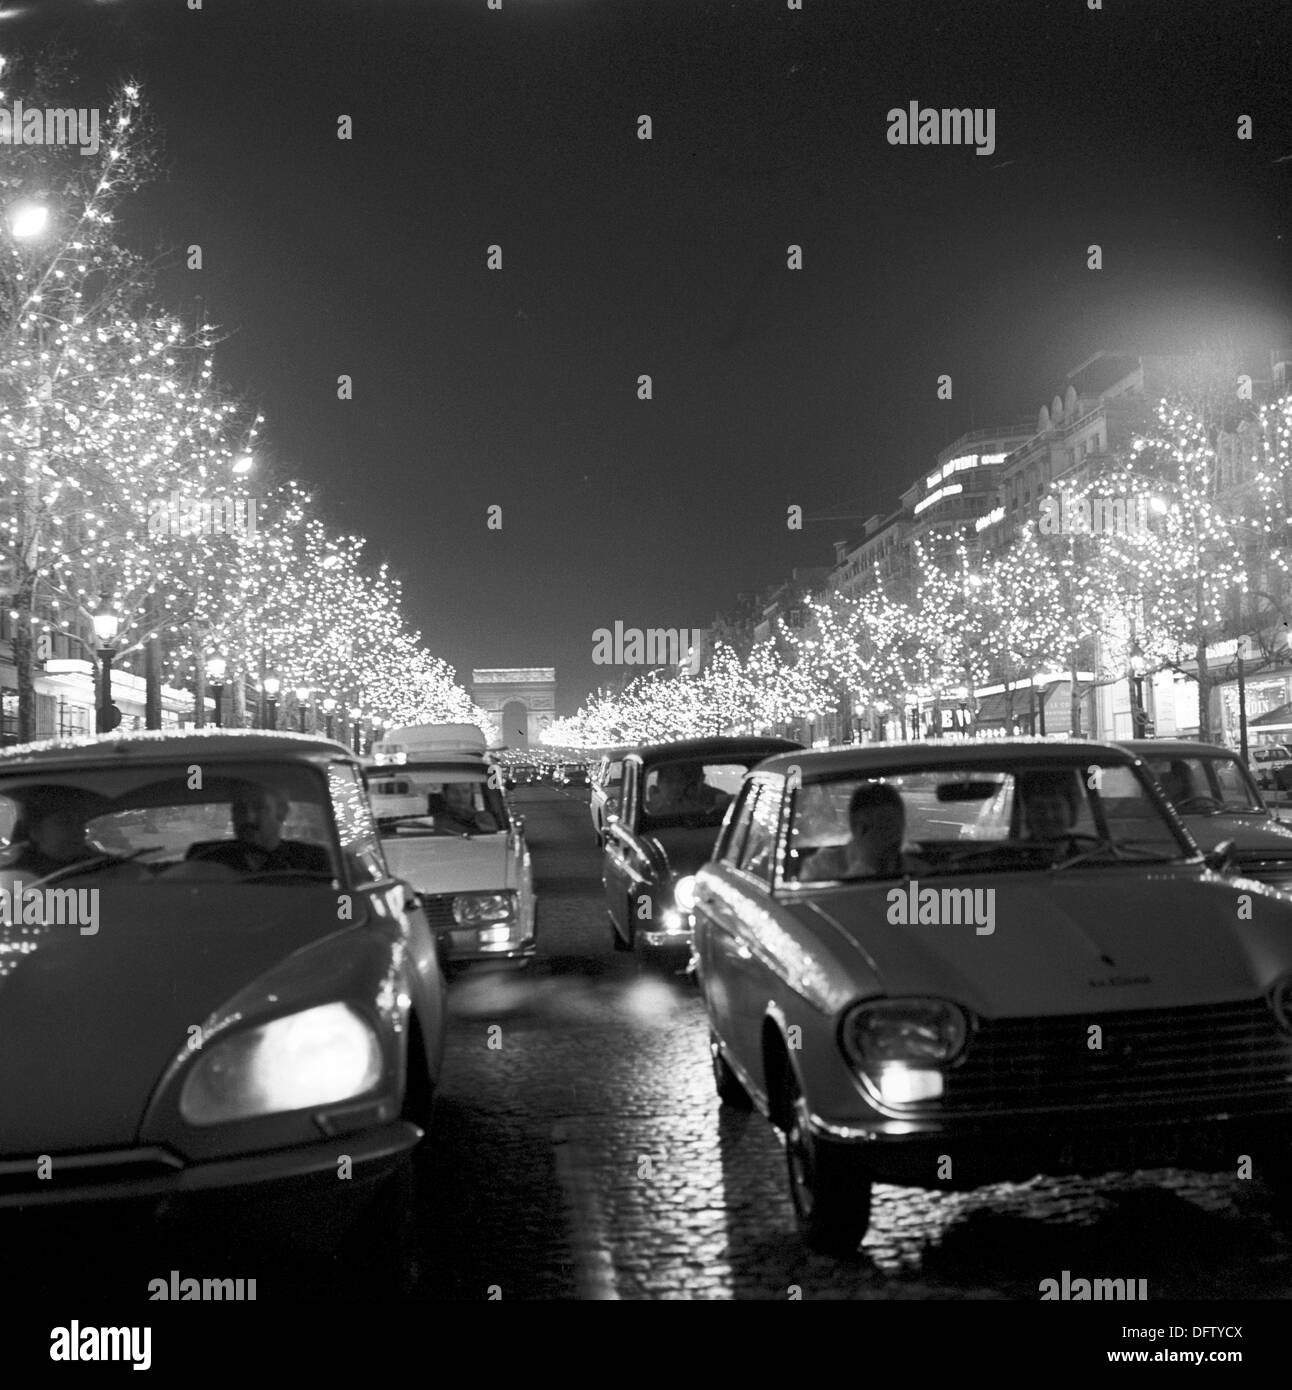 View of the evening traffic on the illuminated Champs-Élysées in Paris, France, in November 1970. The Arc de Triomphe can be seen at the end of the avenue. Photo: Wilfried Glienke Stock Photo